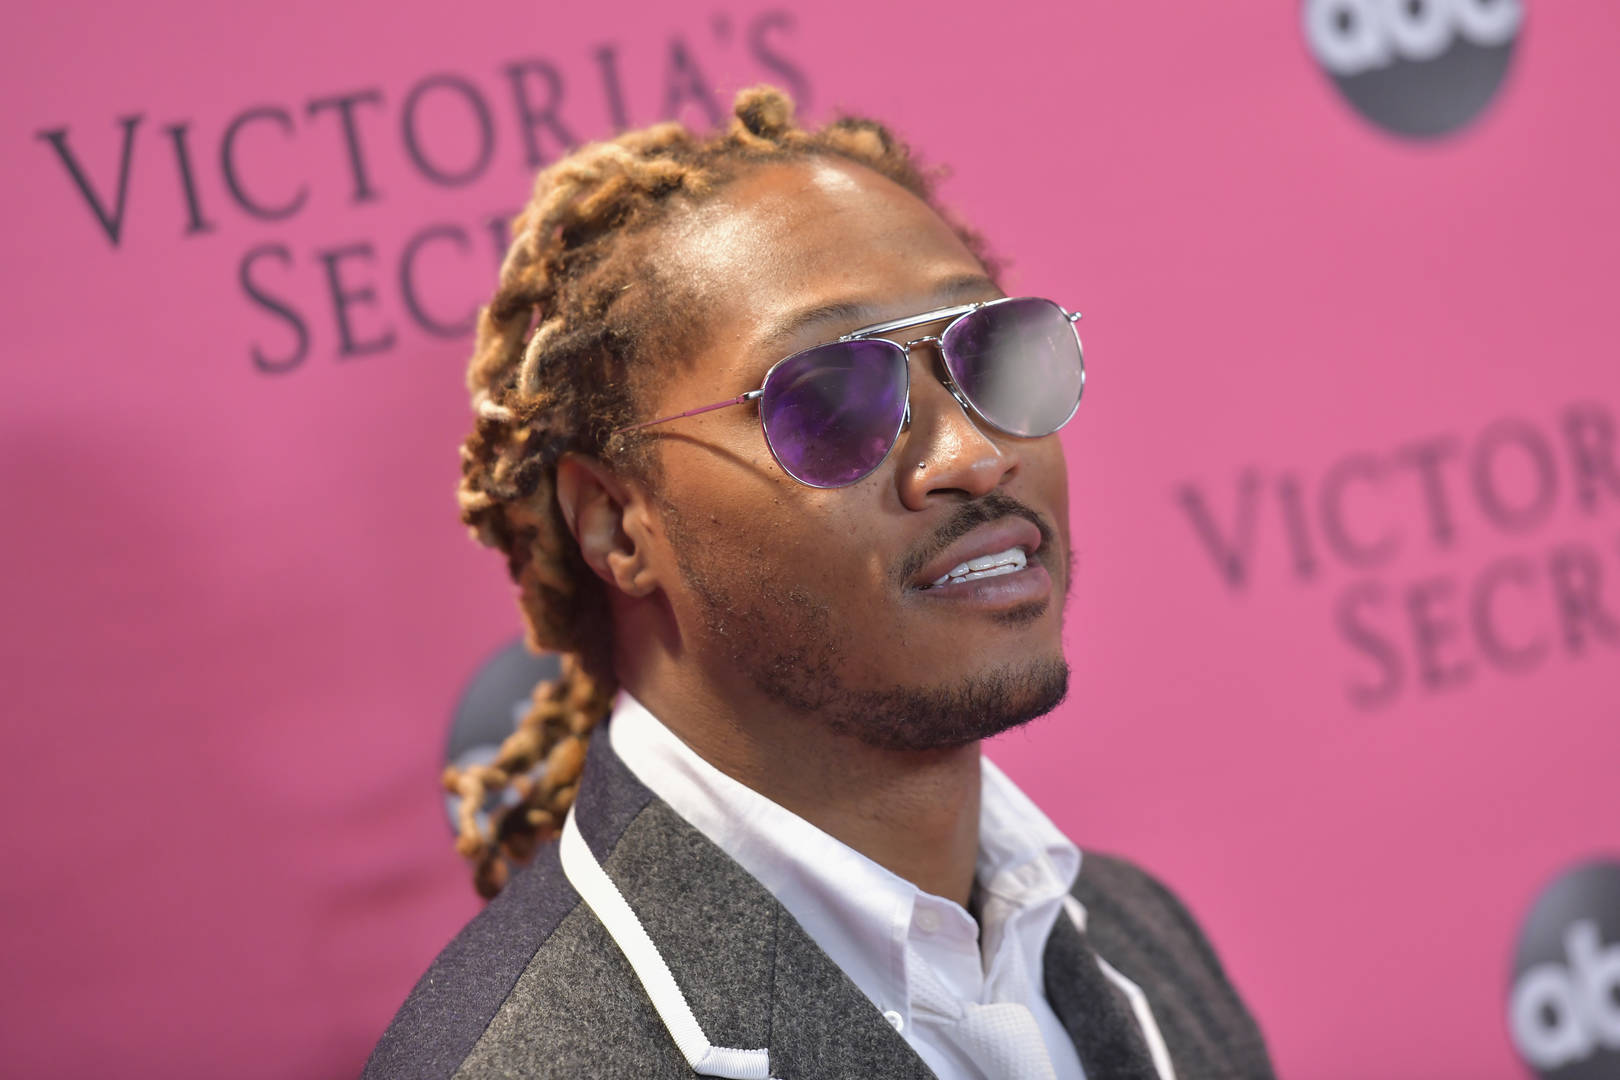 Future & Tyga Face Interesting First-Week Sales Projections 20